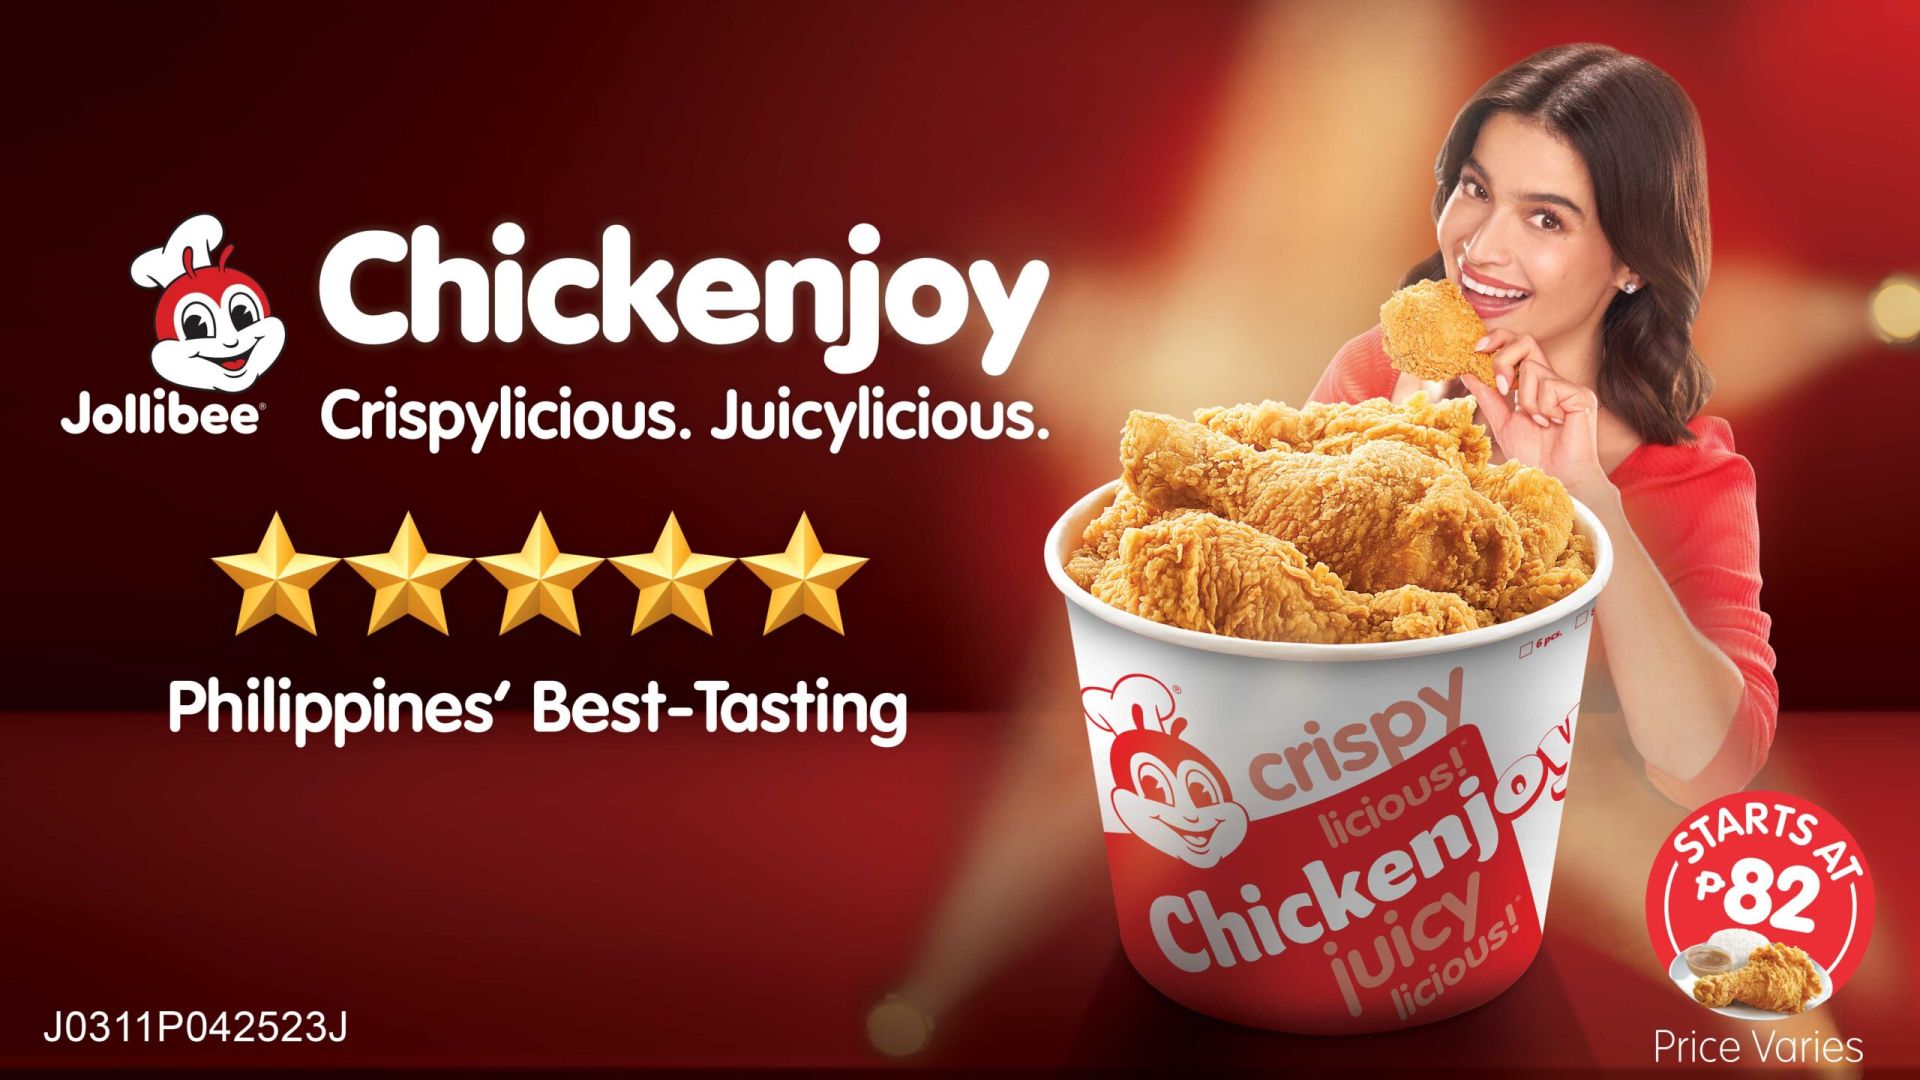 All Time Favorite Jollibee Chickenjoy Gets A Five Star Rating From Anne